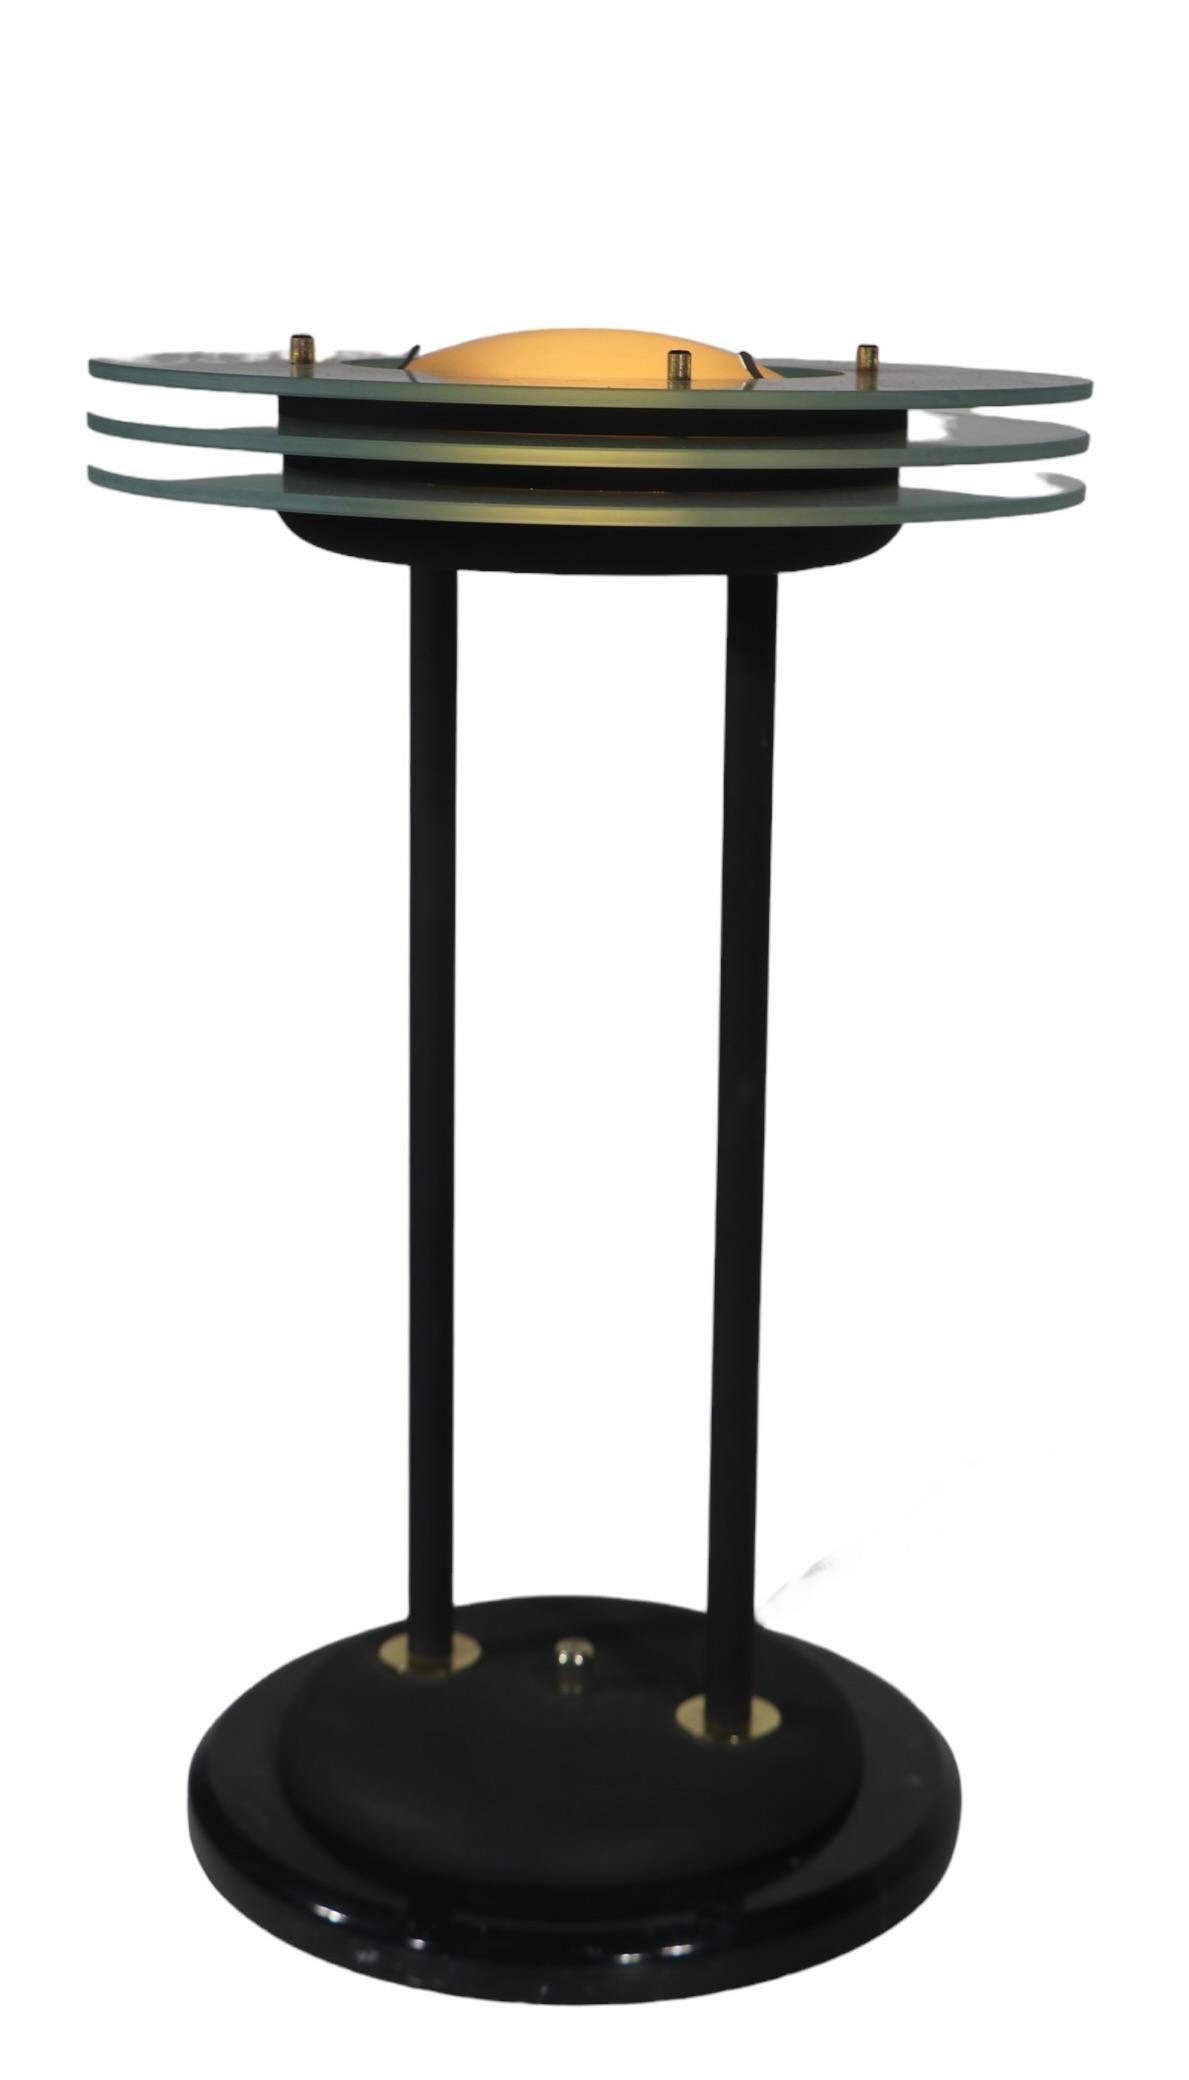 Rare Post Modern Saturn table lamp attributed to Sonneman, or possibly Kovacs, circa 1970/80's. The lamp features three frosted glass rings, with a frosted glass dome top  shade, supported by two metal columns, on a marble plinth base. The lamp has